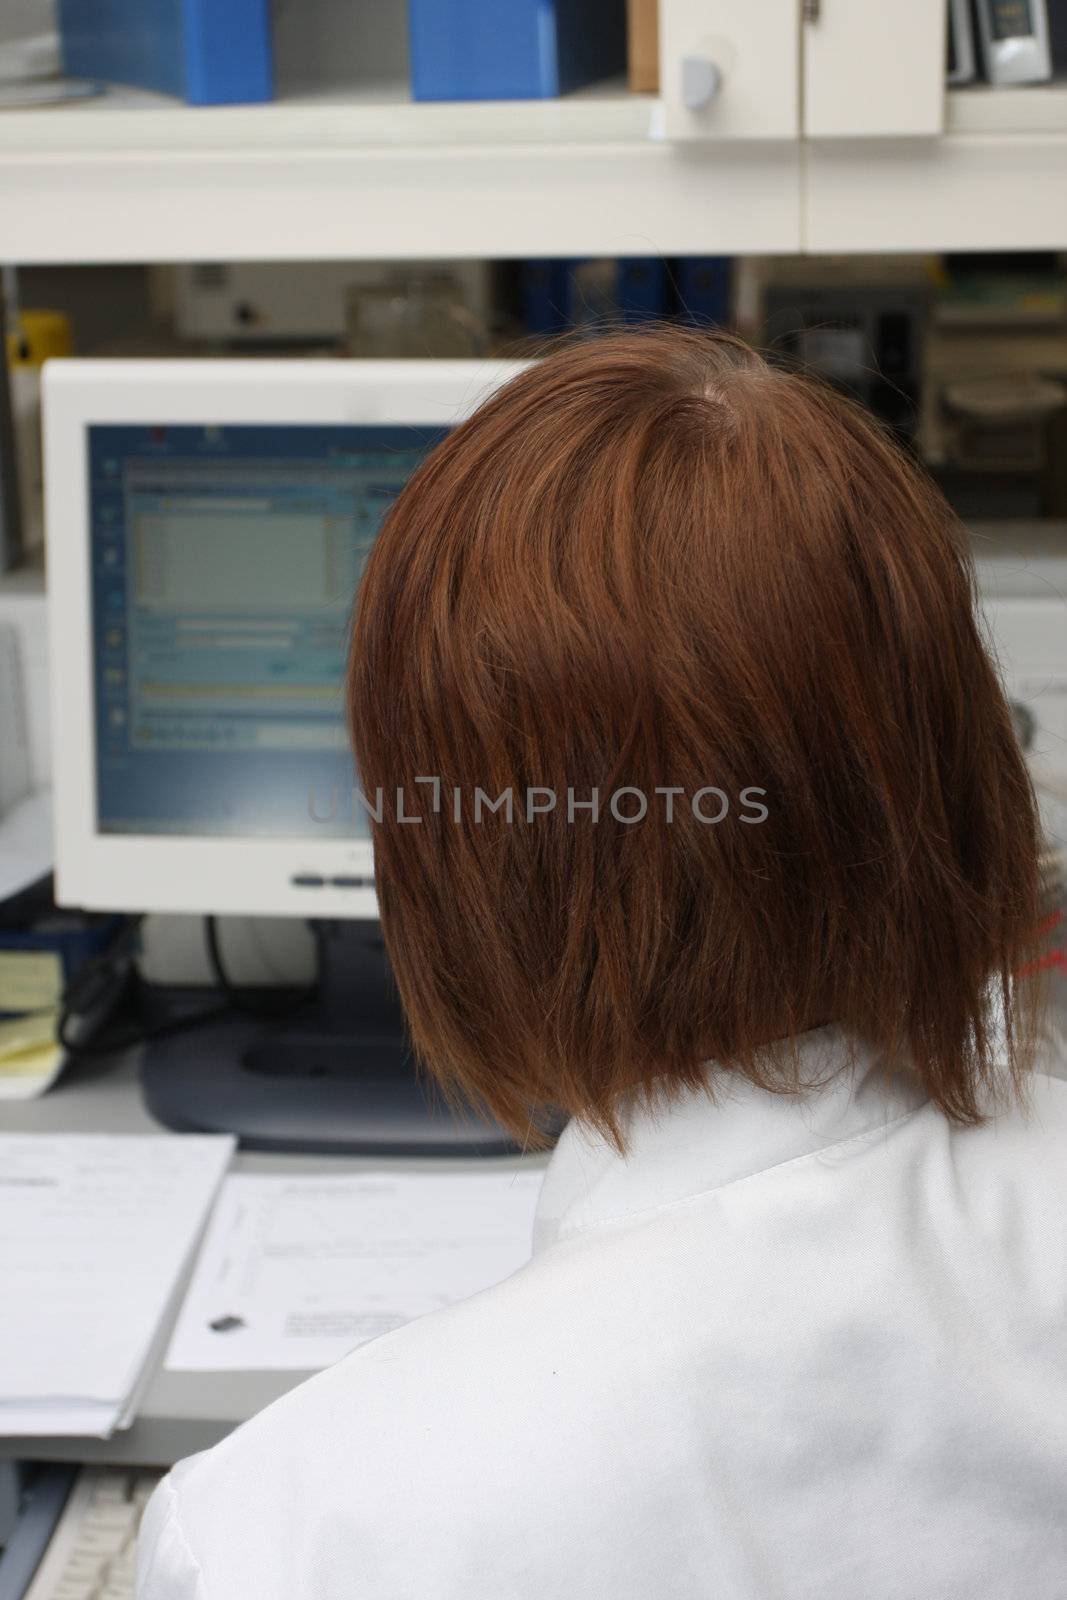 Doctor looking at lab results on computer